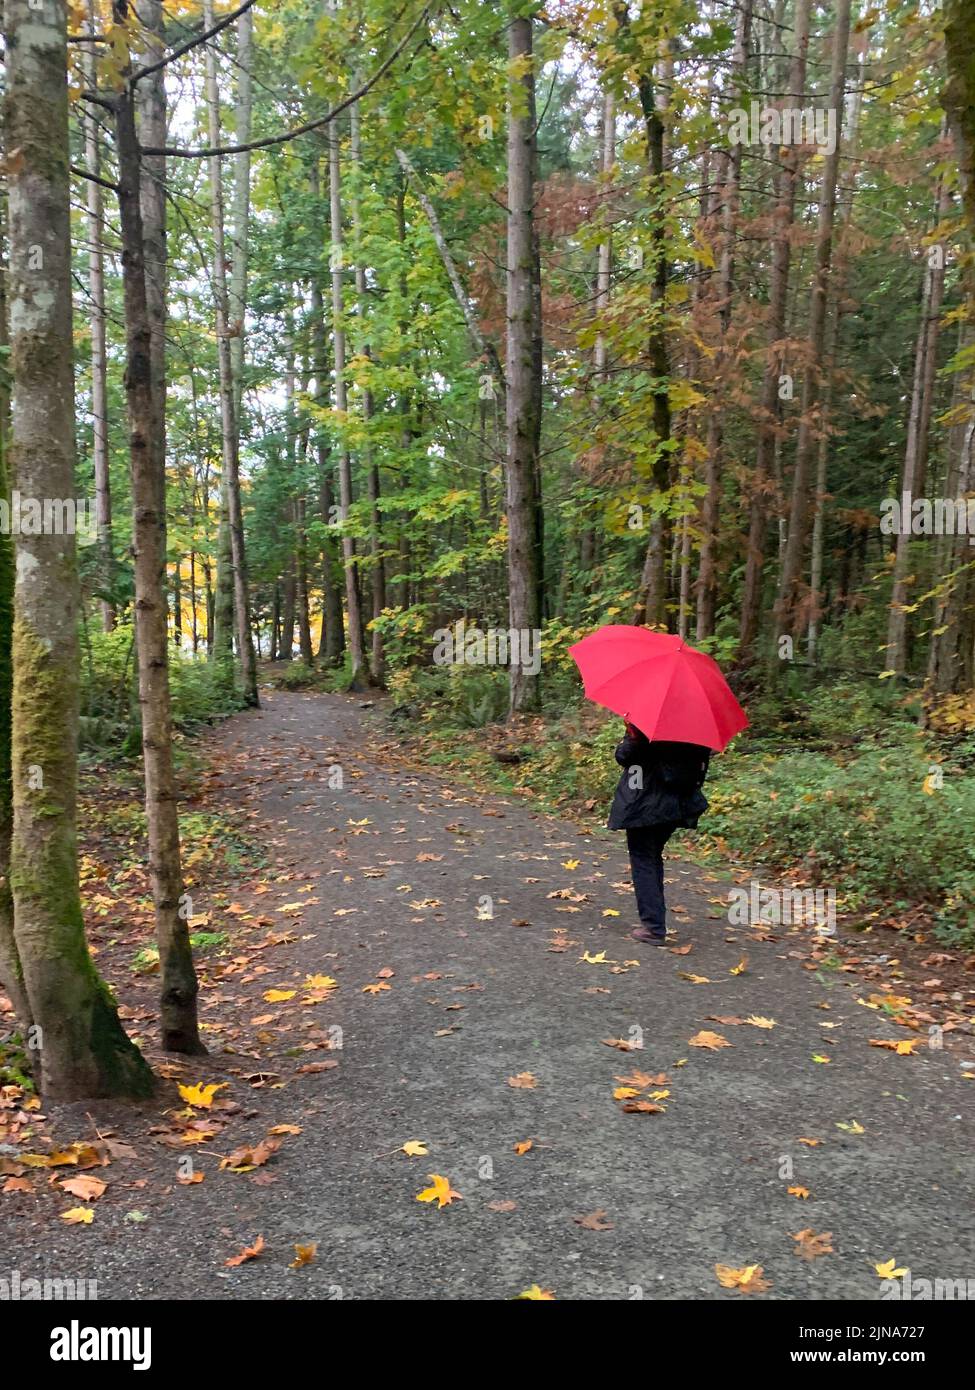 Rear view of a woman walking in a forest with a red umbrella, British Columbia, Canada Stock Photo